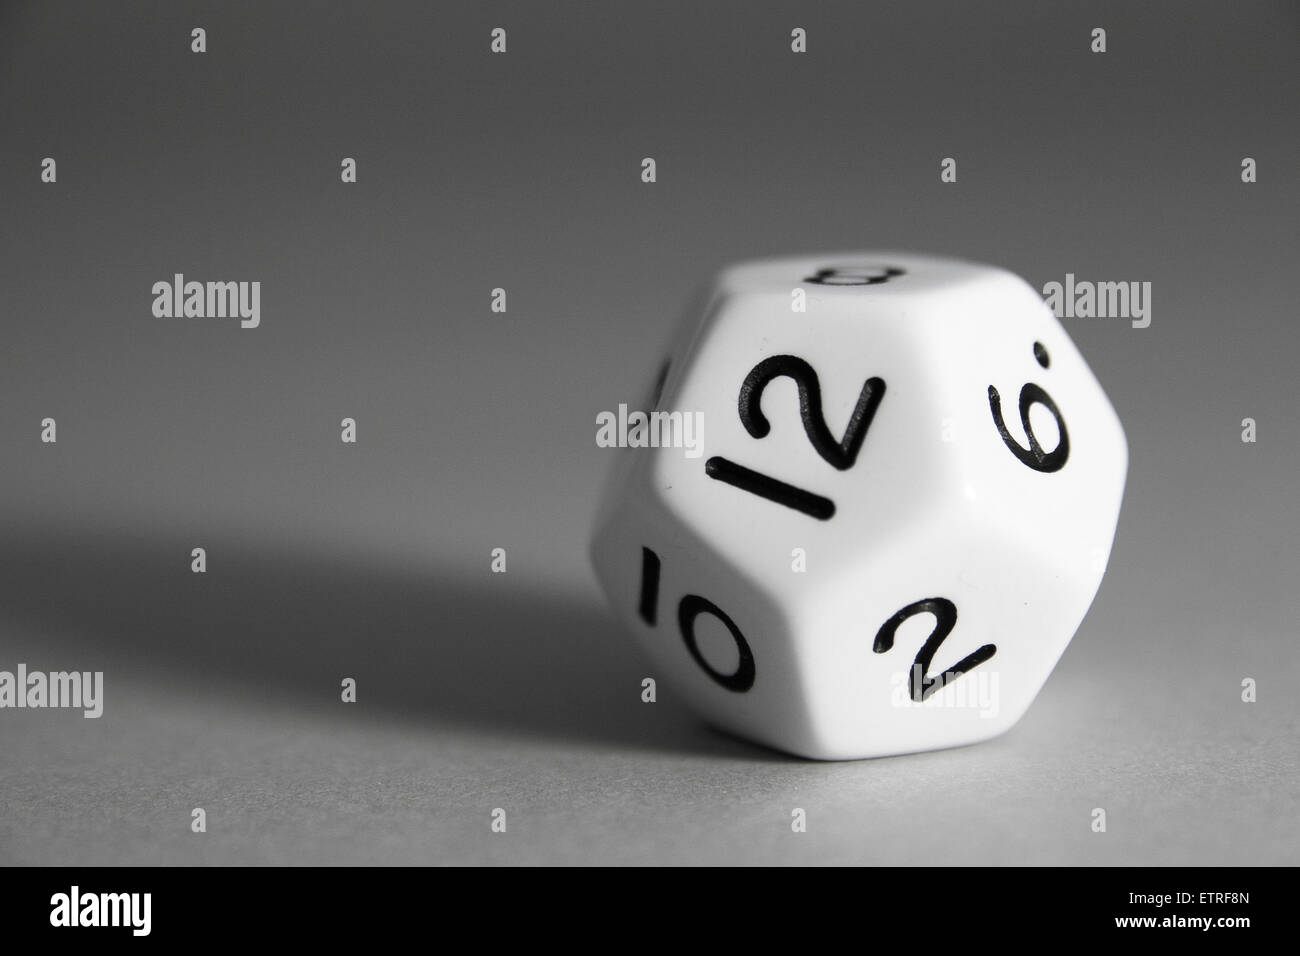 A black and white regular dodecahedron die with twelwe faces and numbers on a grey background. Stock Photo